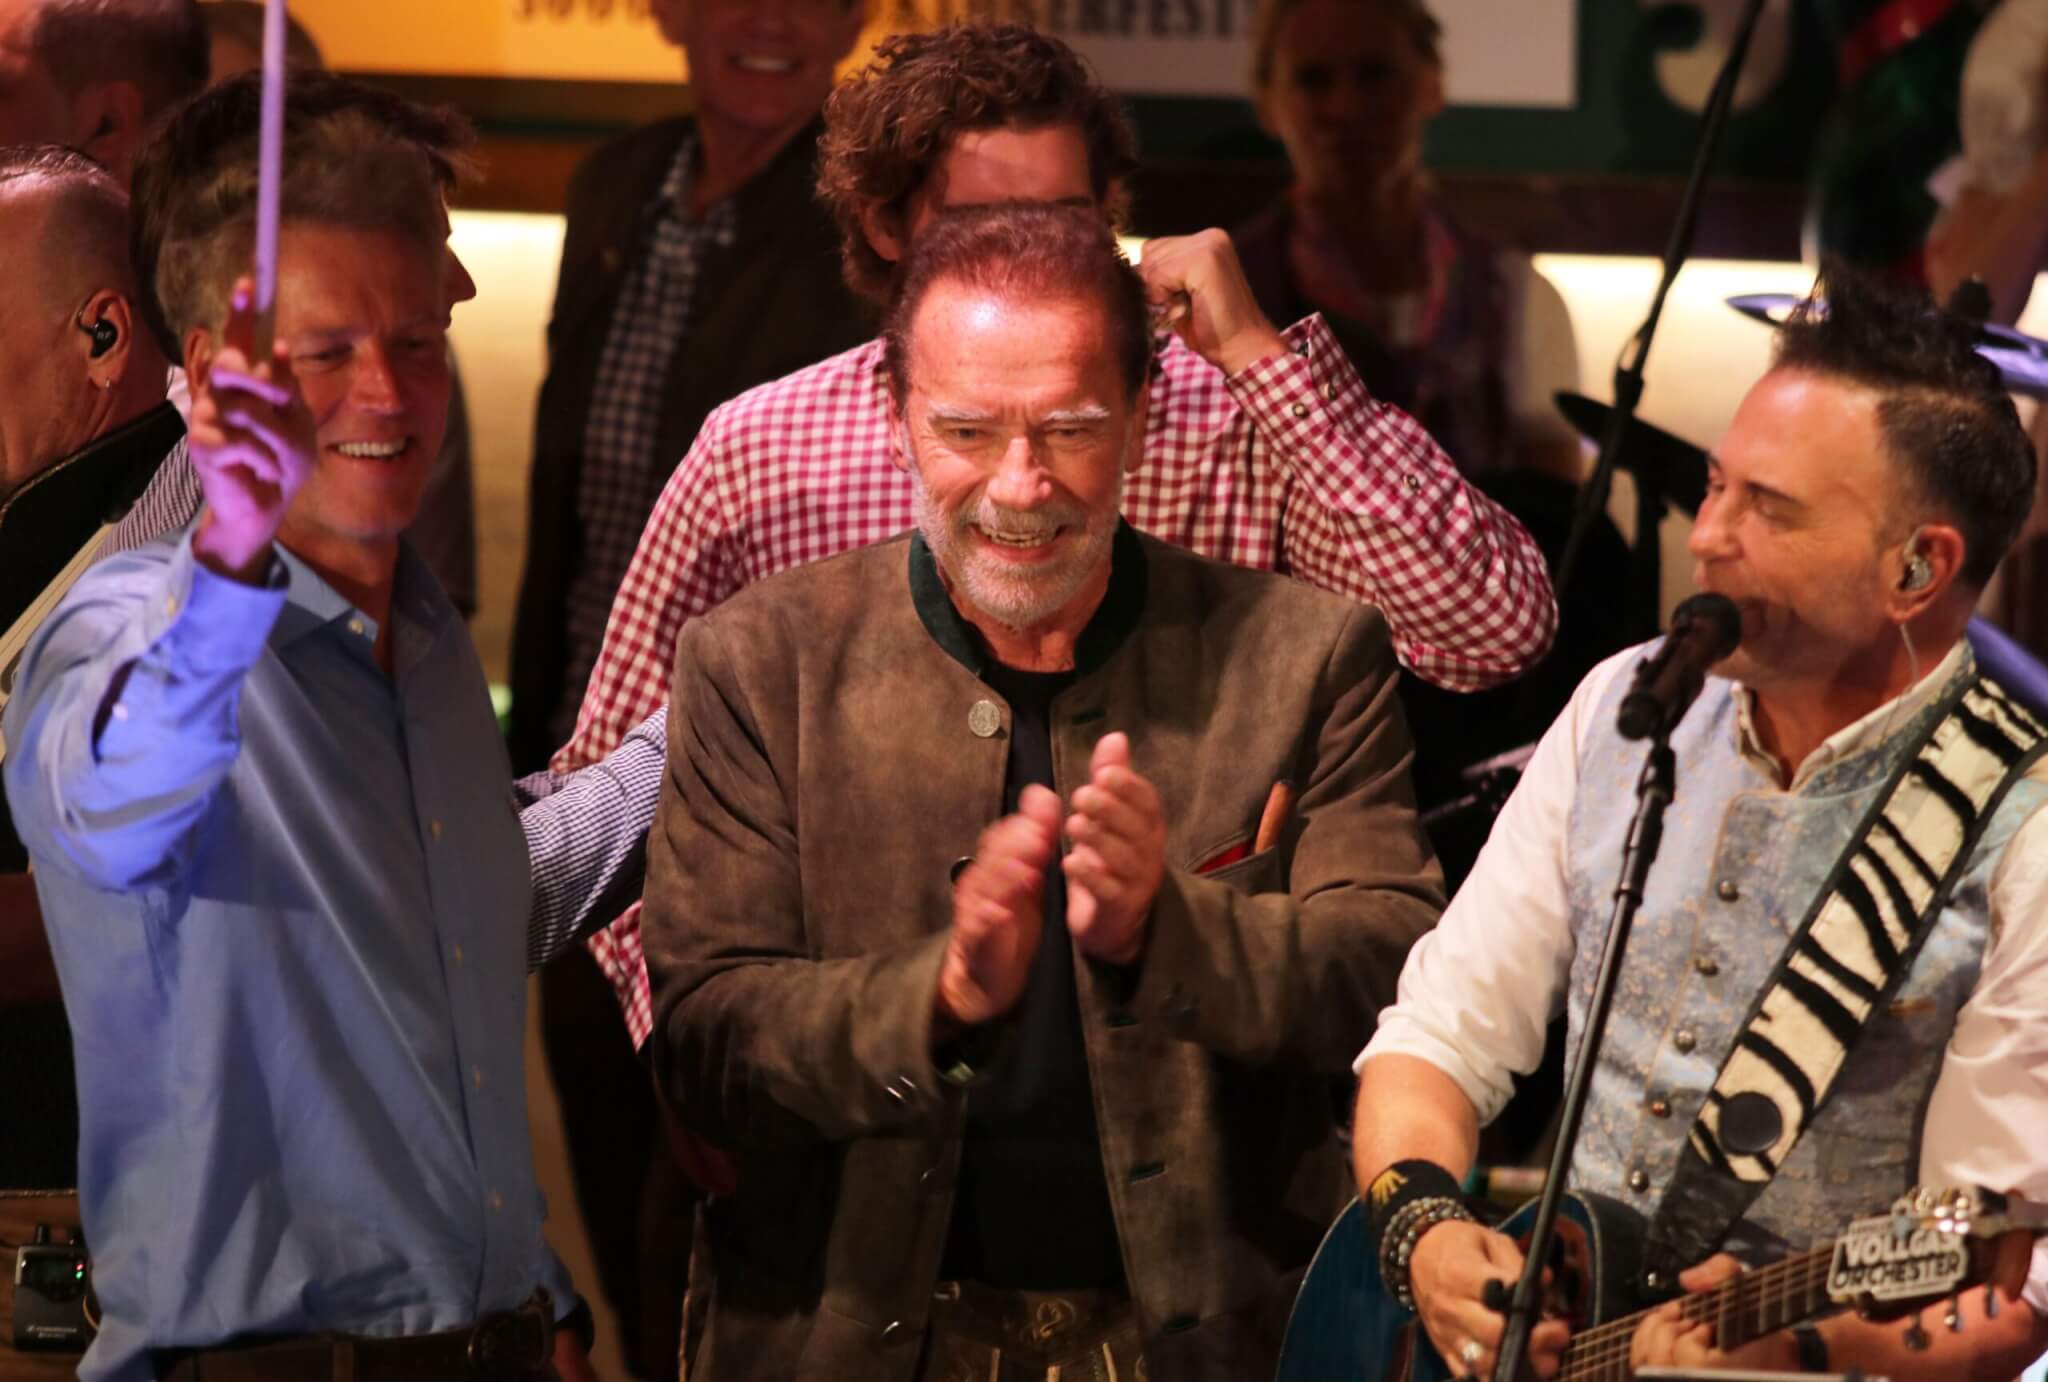 Arnold Schwarzenegger, former Governer of California and actor came from Los Angeles to direct the Oktoberfestband in the Marstall Beerhall, this in company with his 2 sons Chris Schwarzenegger, Patrick Schwarzenegger and partner Heather Milligan